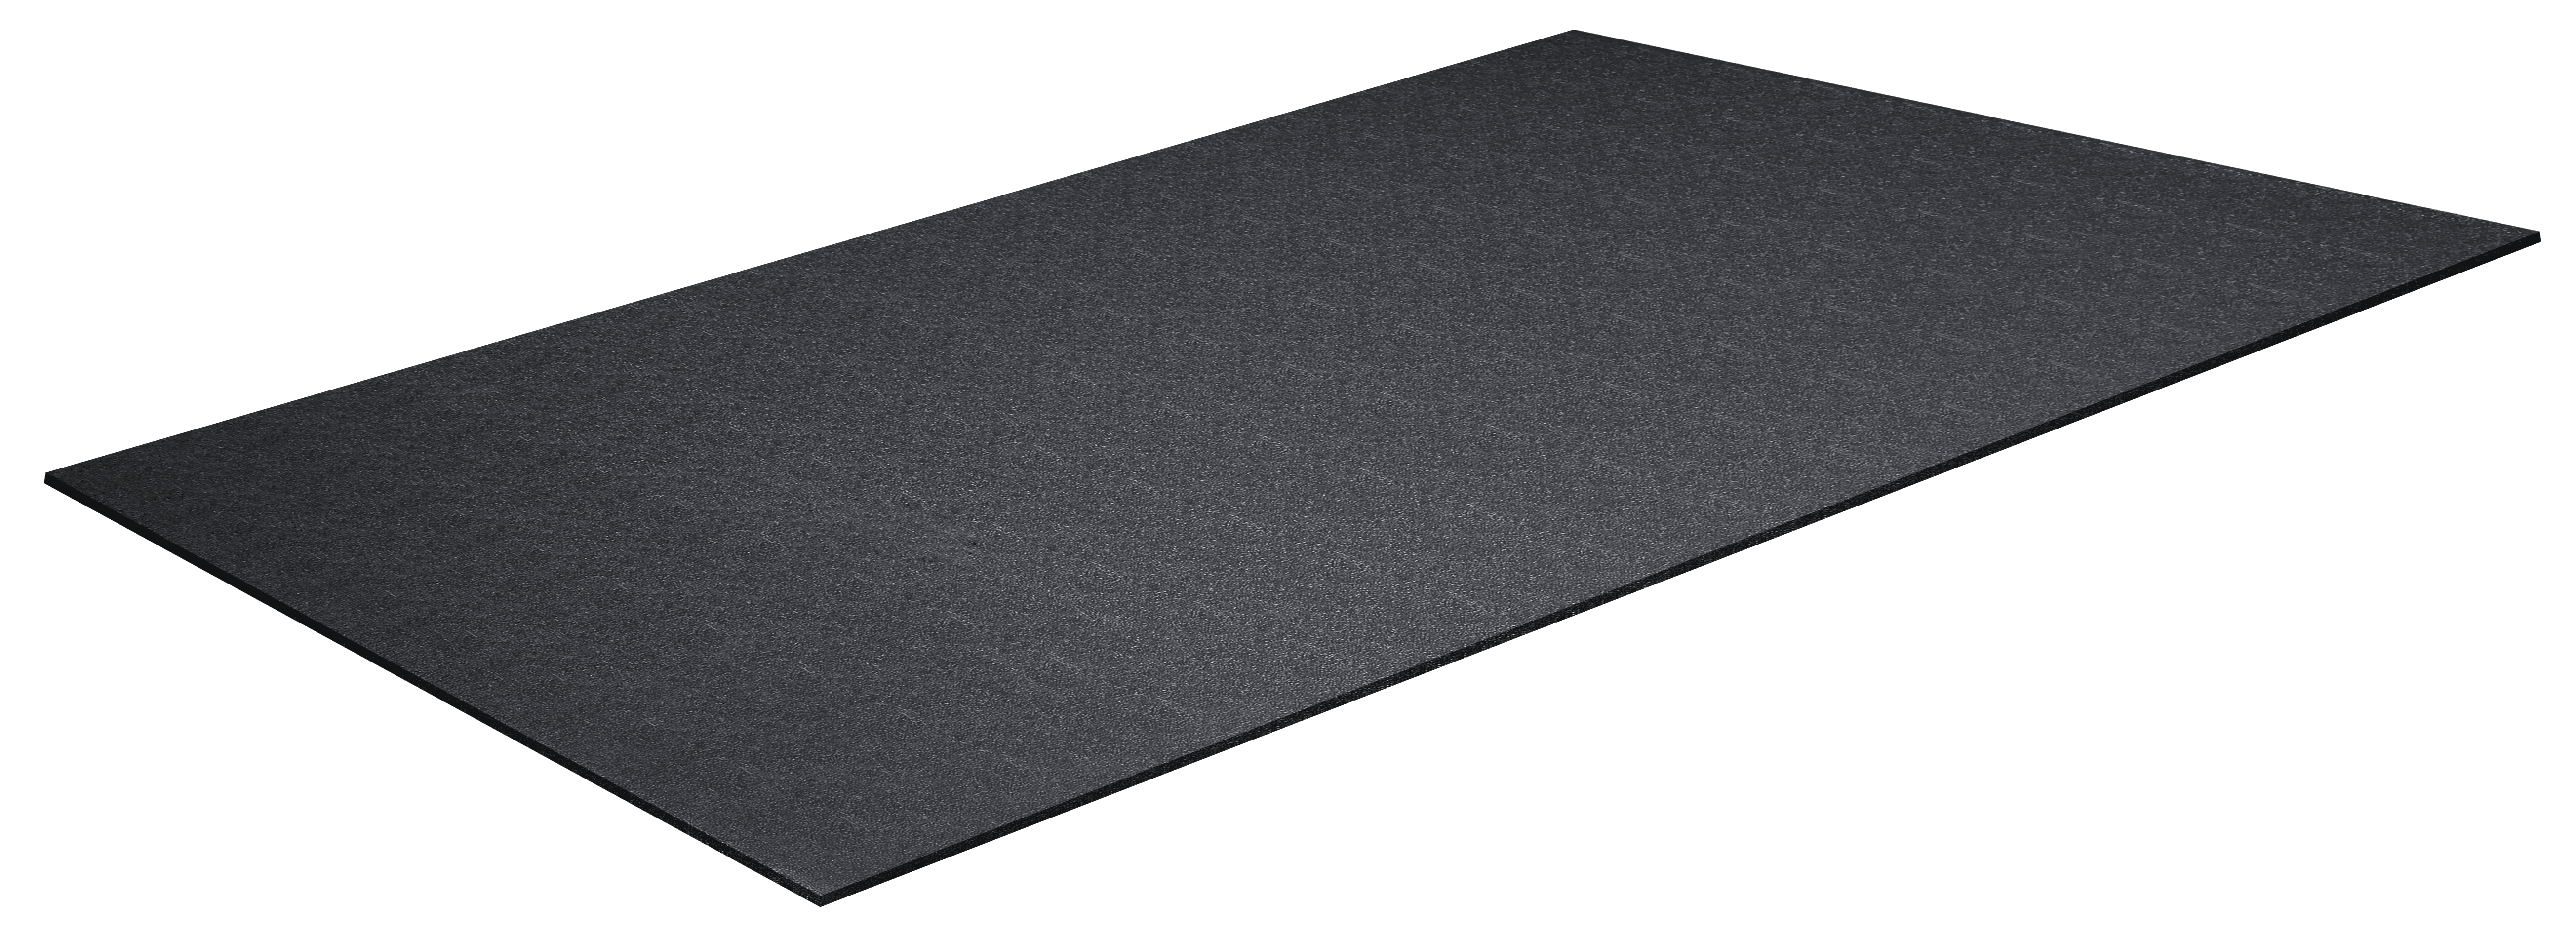 Floor Protector Pad for Home and Gym Use Exercise Bike Equipment Mat High Density Waterproof PVC GOFLAME Treadmill Mat 4' x 2' x 0.3 